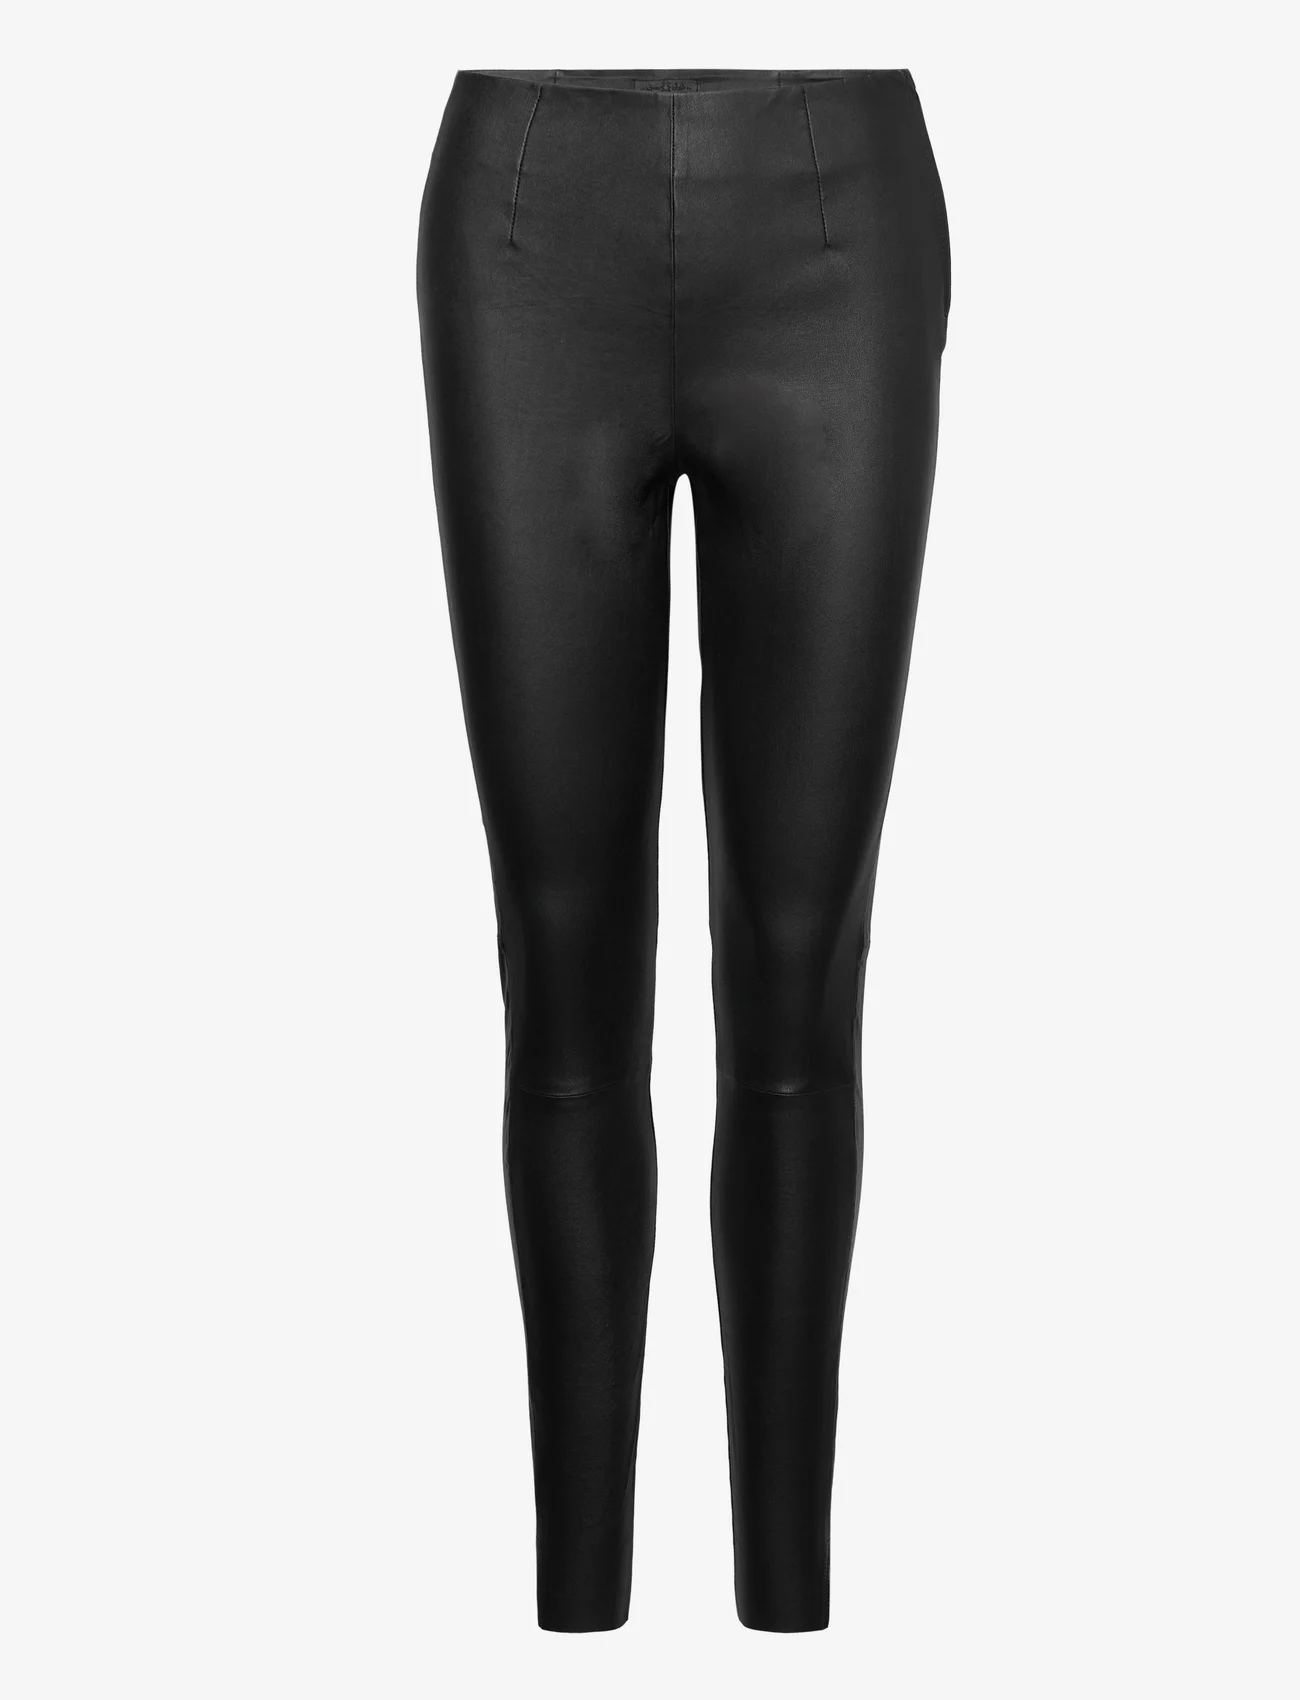 DEPECHE - Stretch legging - party wear at outlet prices - 099 black (nero) - 0